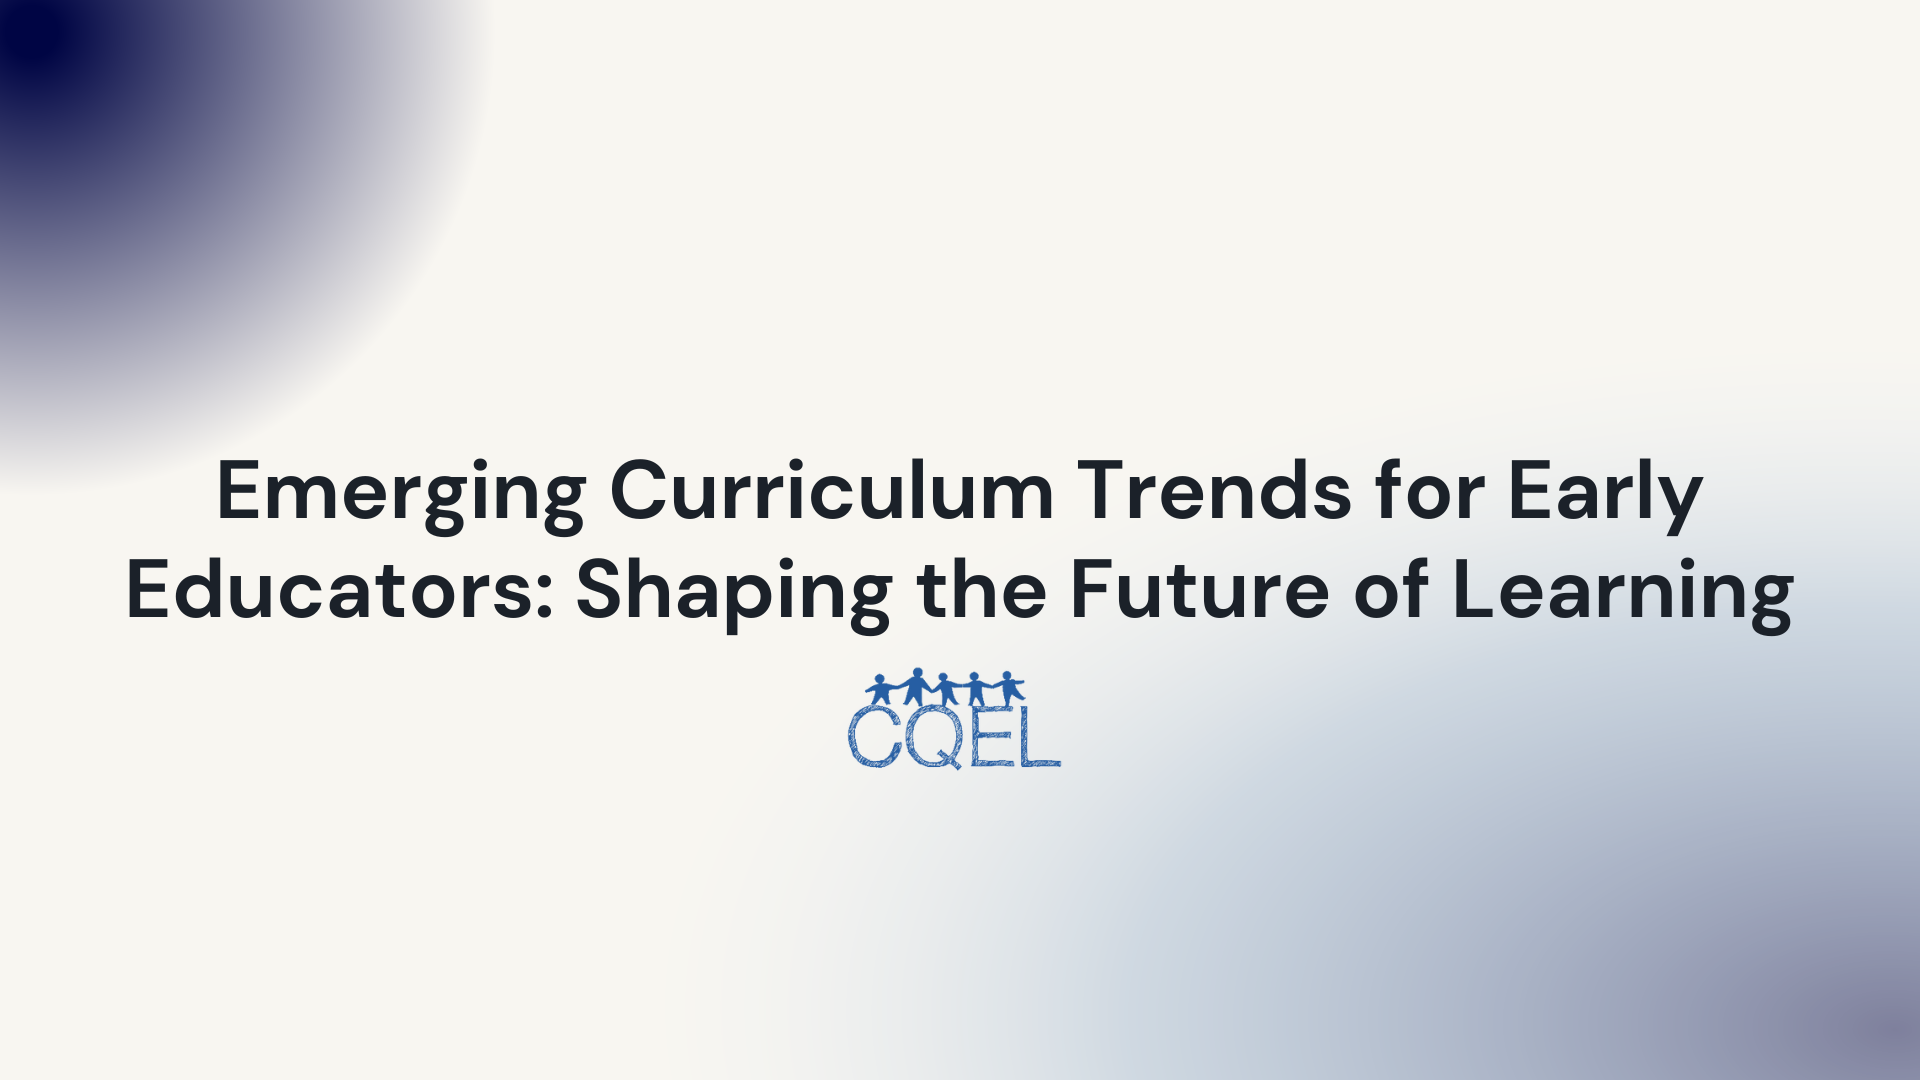 Emerging Curriculum Trends for Early Educators: Shaping the Future of Learning